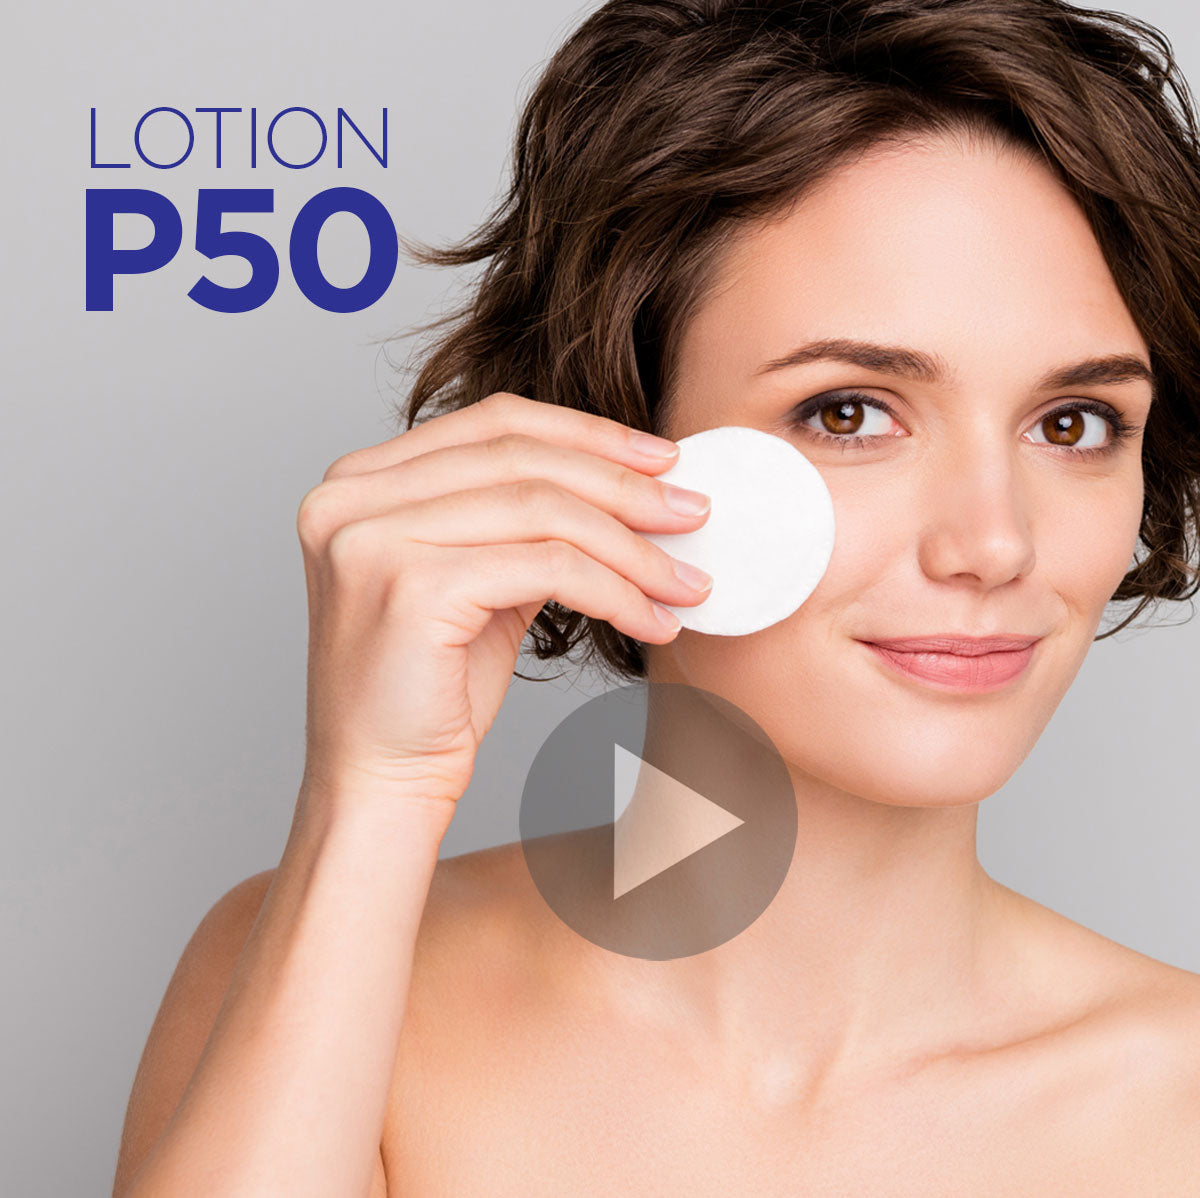 Biologique Recherche Lotion P50. Discover Your P50. Which Lotion P50 Is Best Suited For Your Skin Type